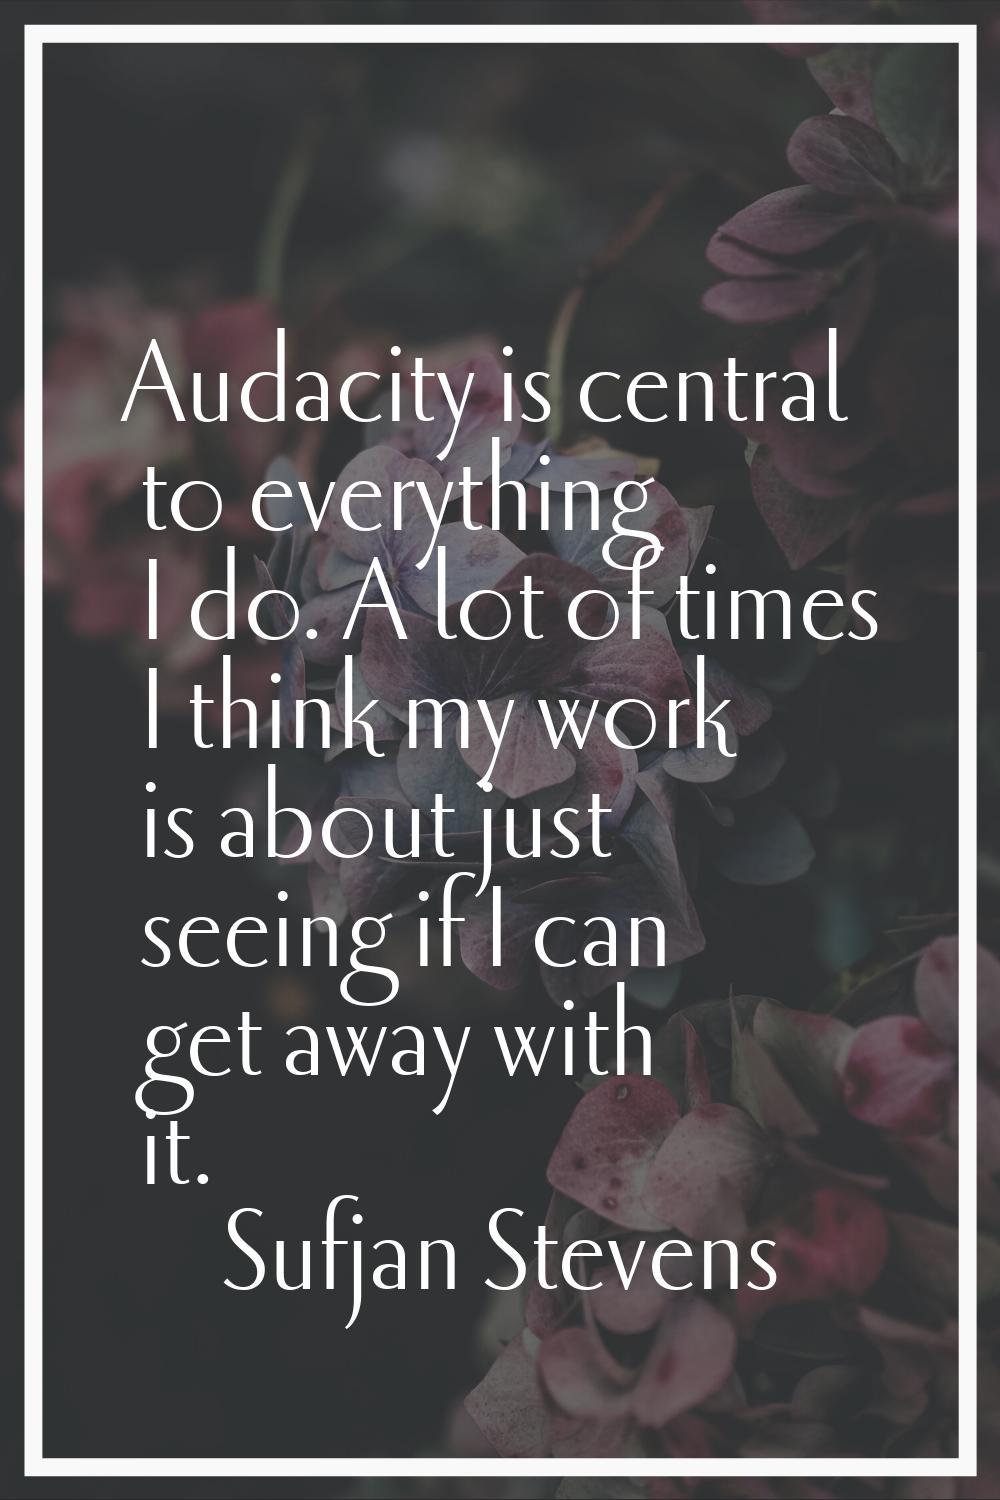 Audacity is central to everything I do. A lot of times I think my work is about just seeing if I ca